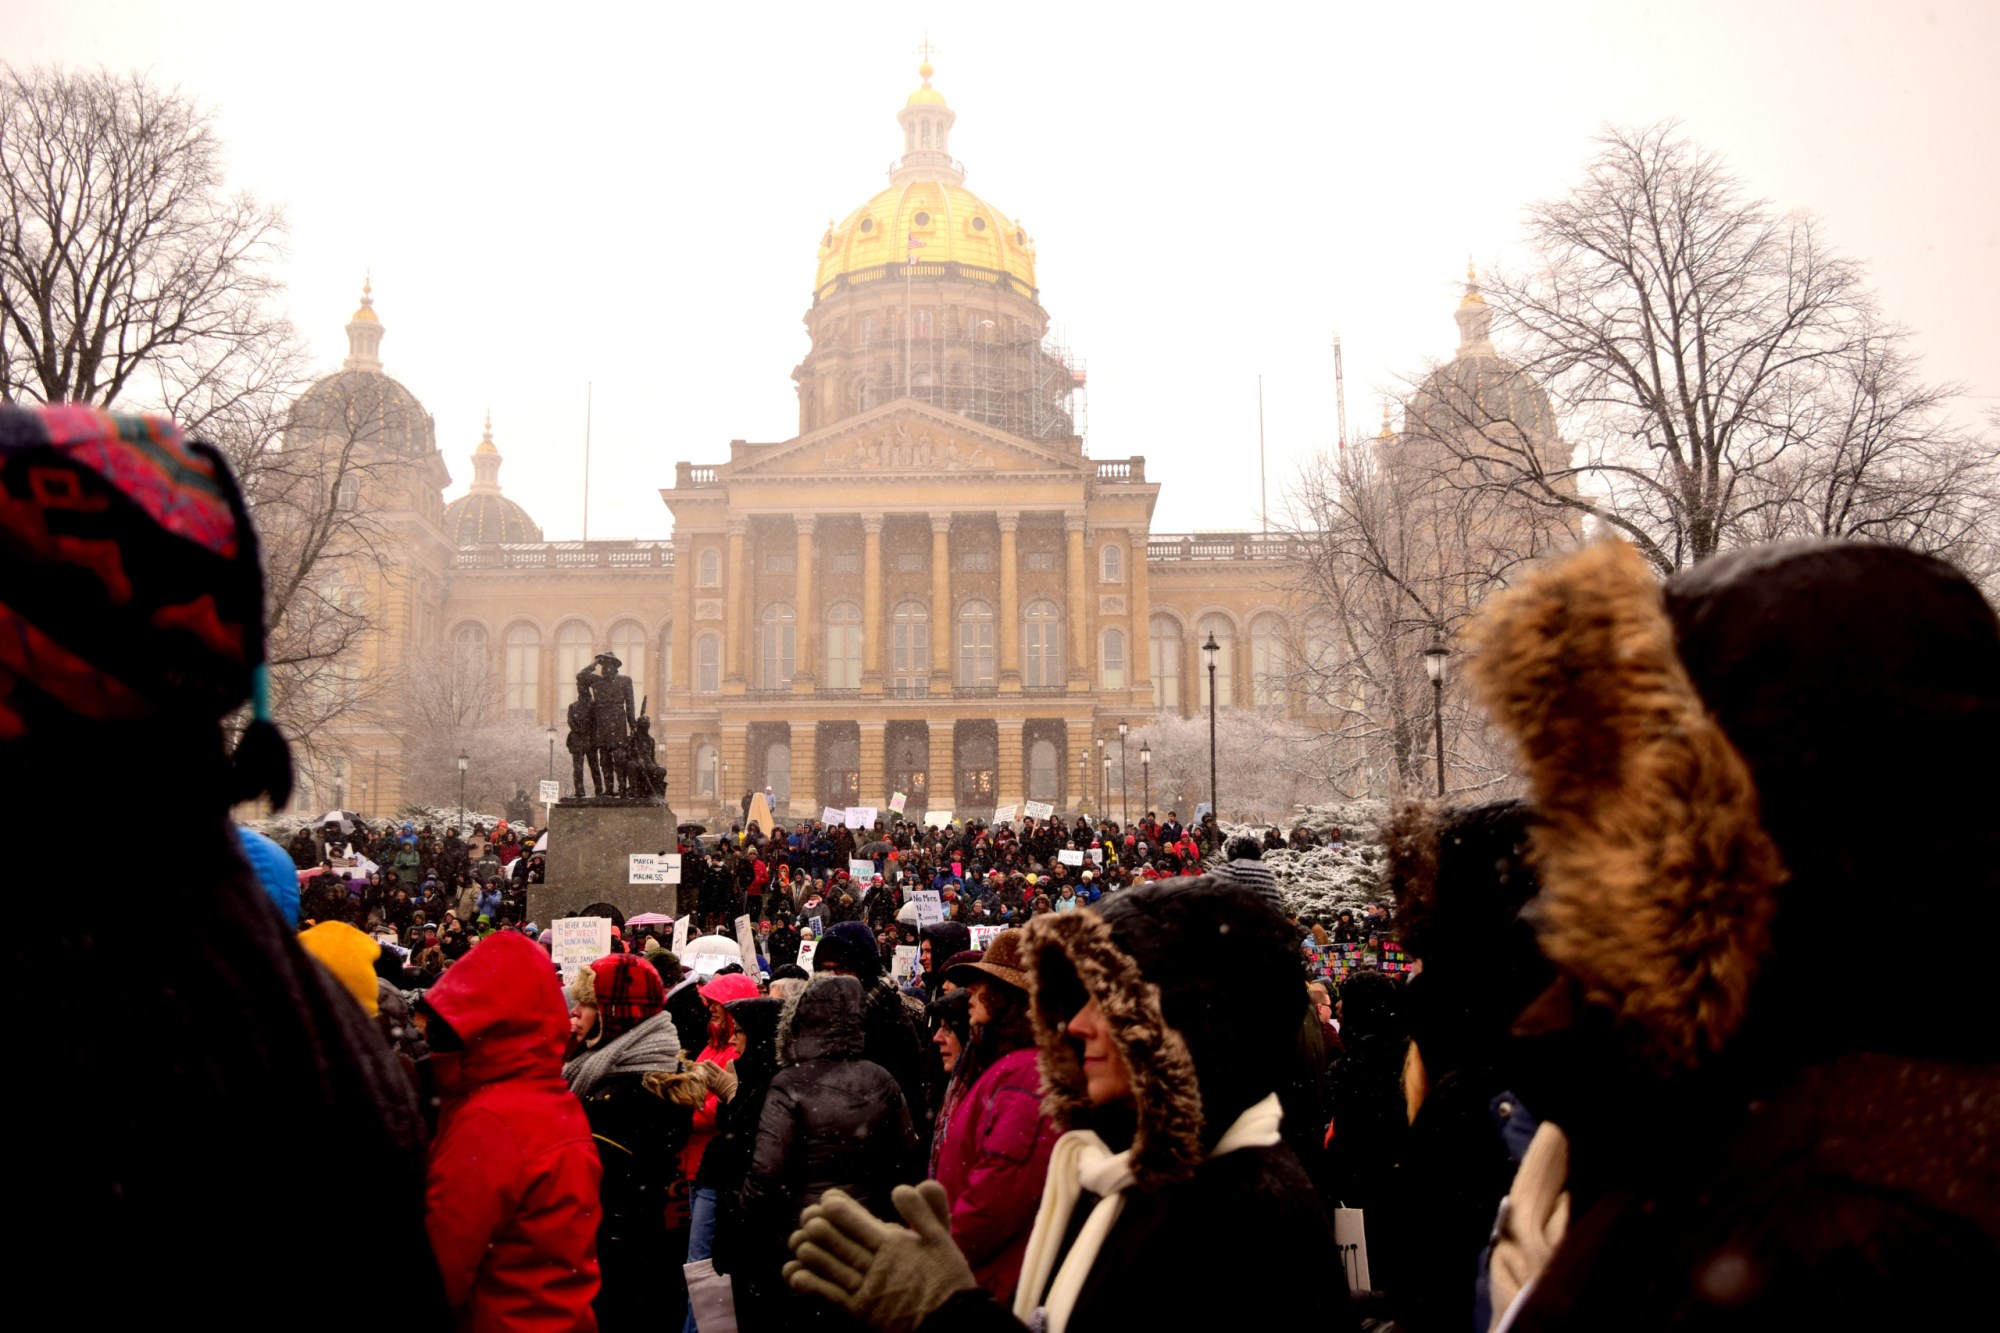 Protesters march in front of the Iowa State Capitol in Des Moines, Iowa, during the March for Our Lives rally on March 24, 2018. (Brandi Webber)